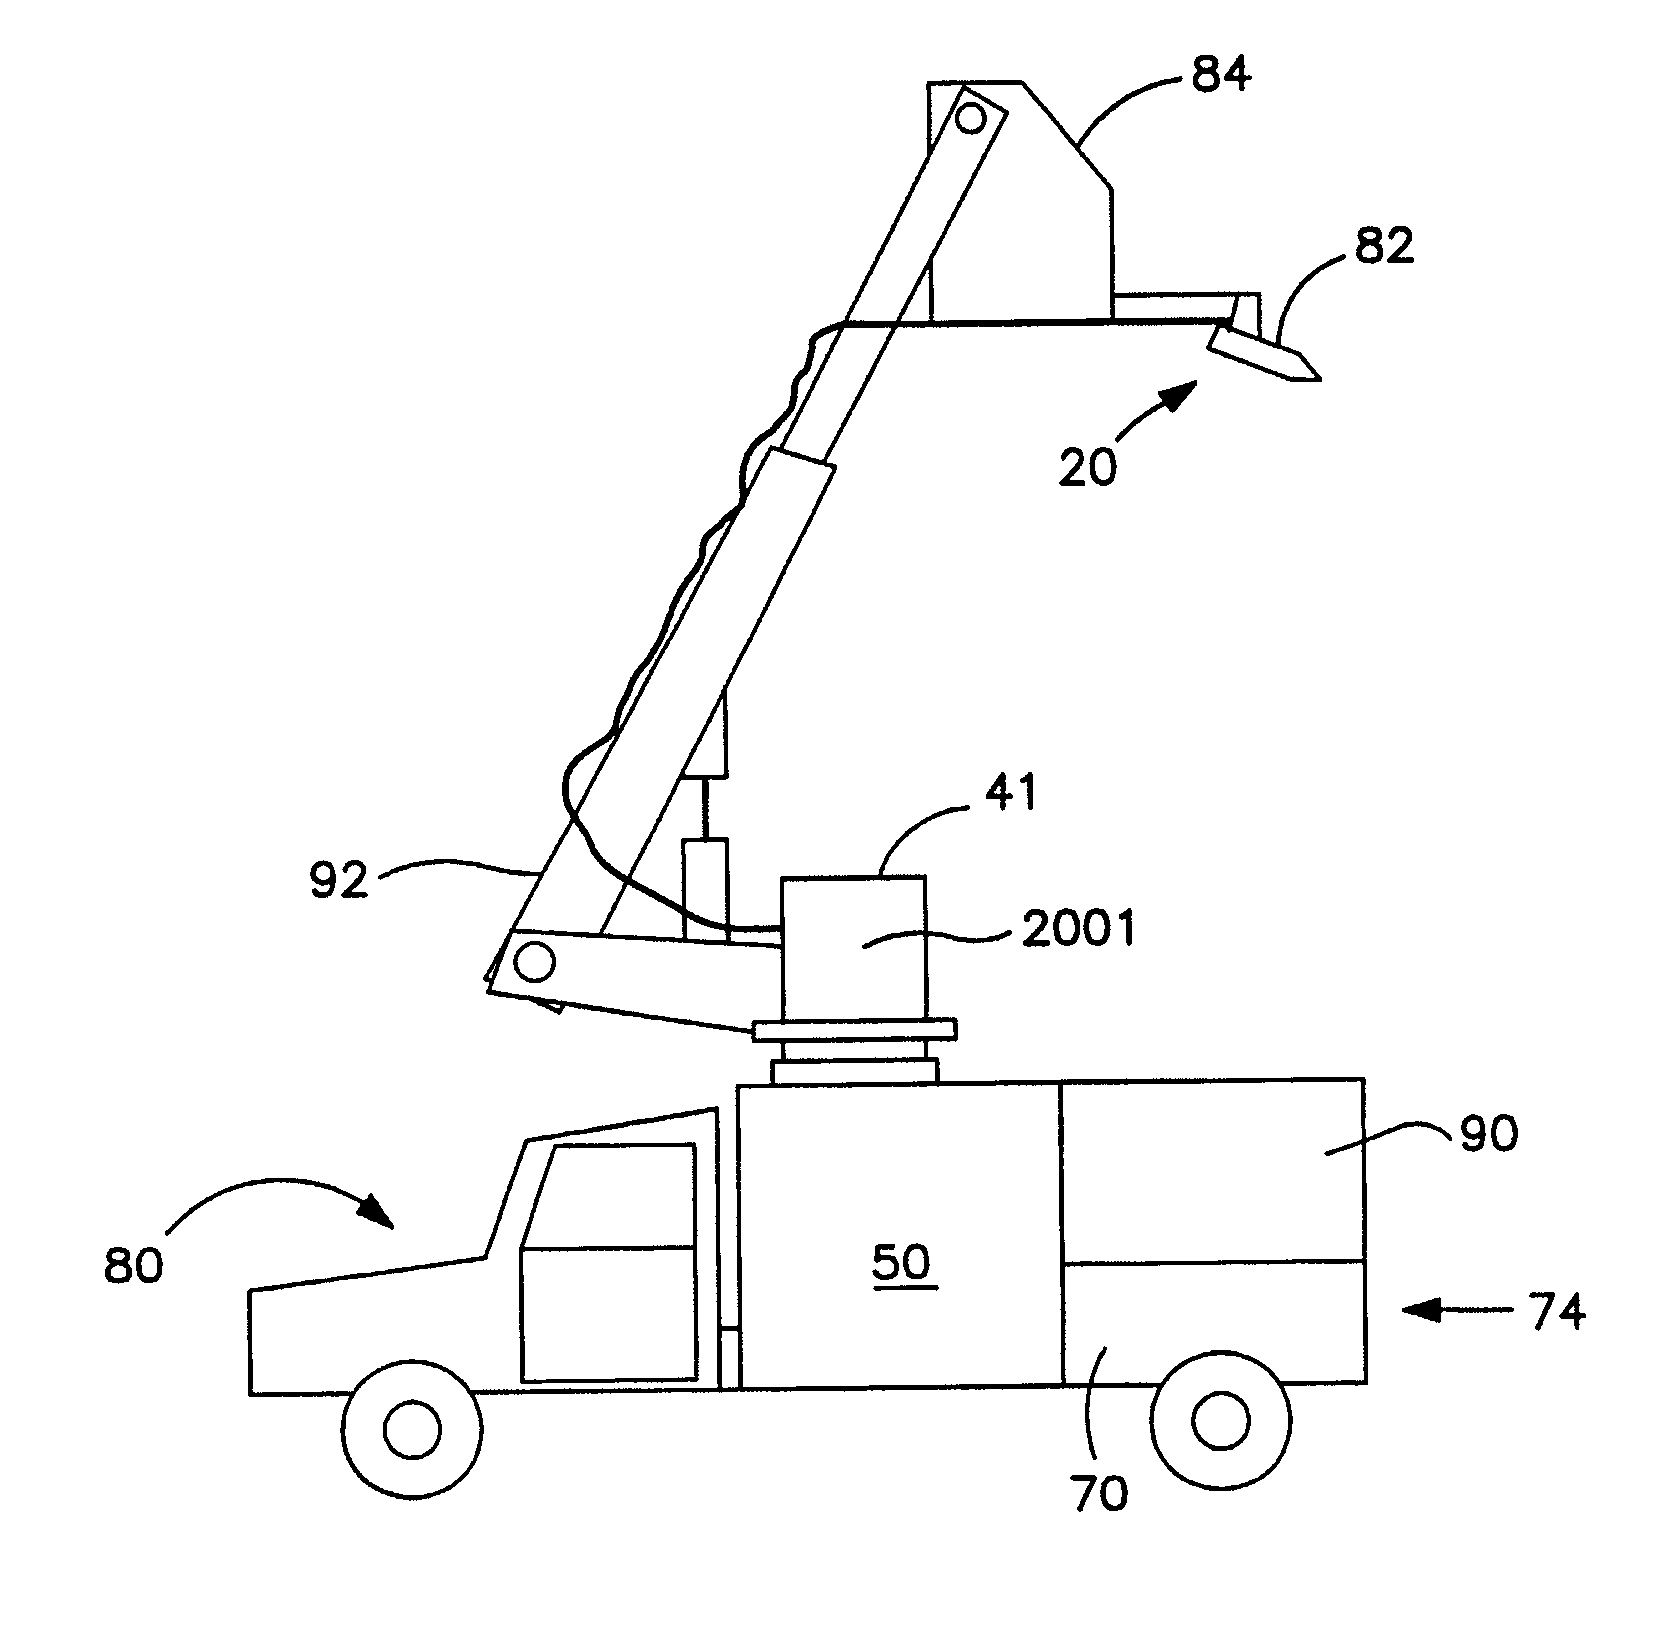 Hybrid deicing system and method of operation